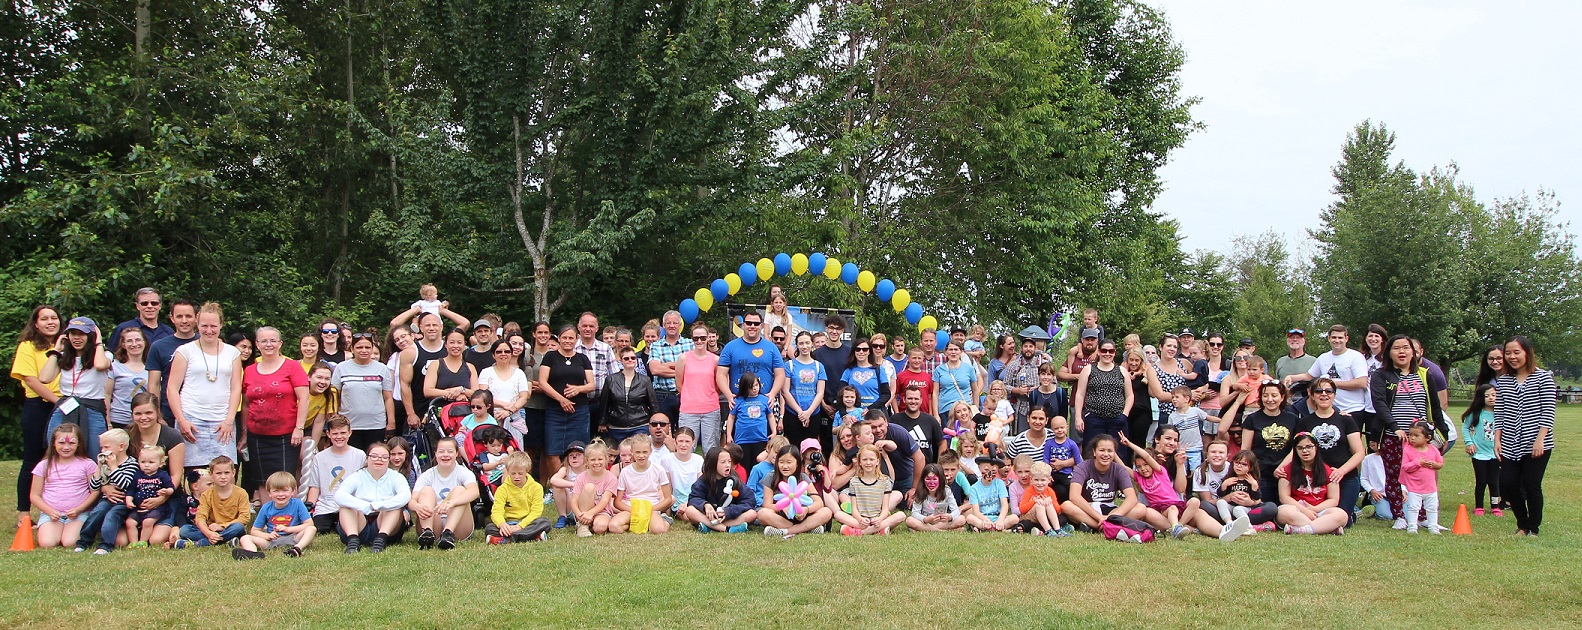 Friends and family supporting people with Down syndrome in the Fraser Valley, BC.